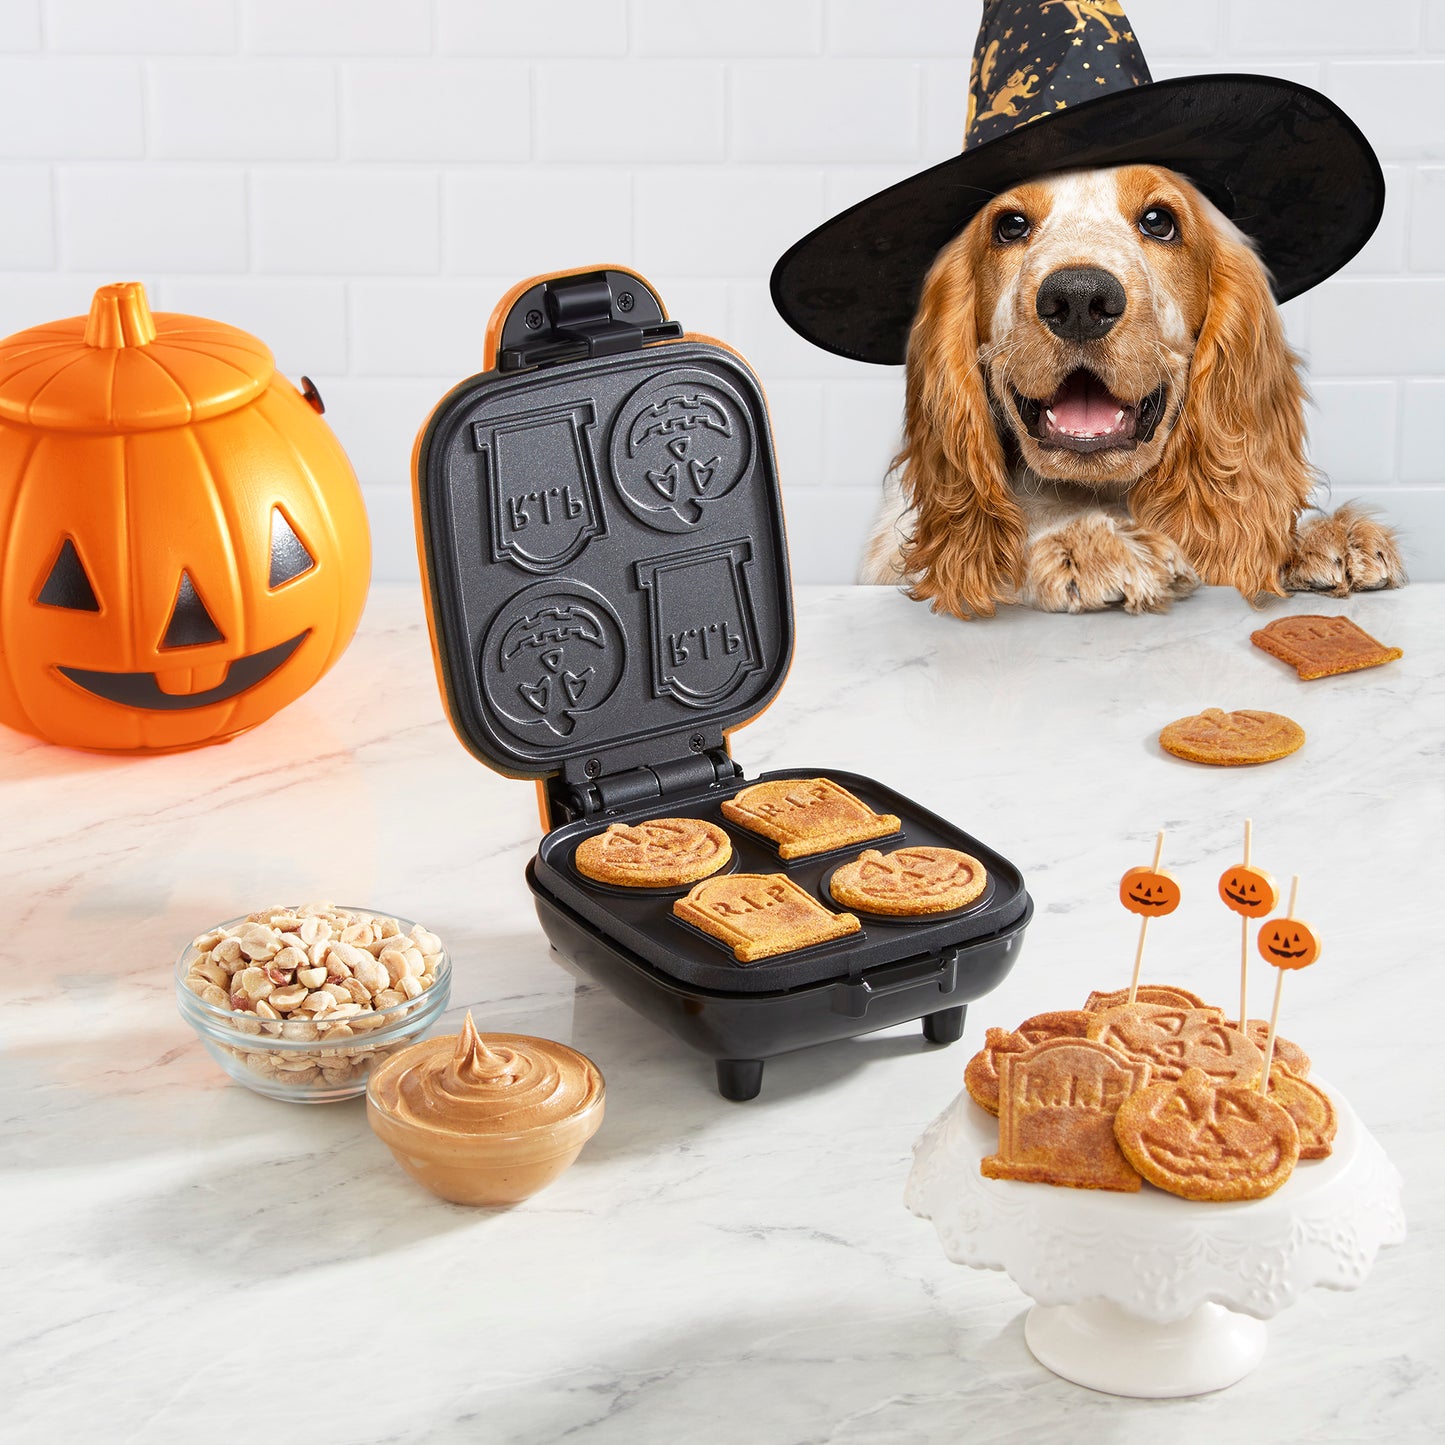 Mini Dog Treat Maker for Sale in Queens, NY - OfferUp